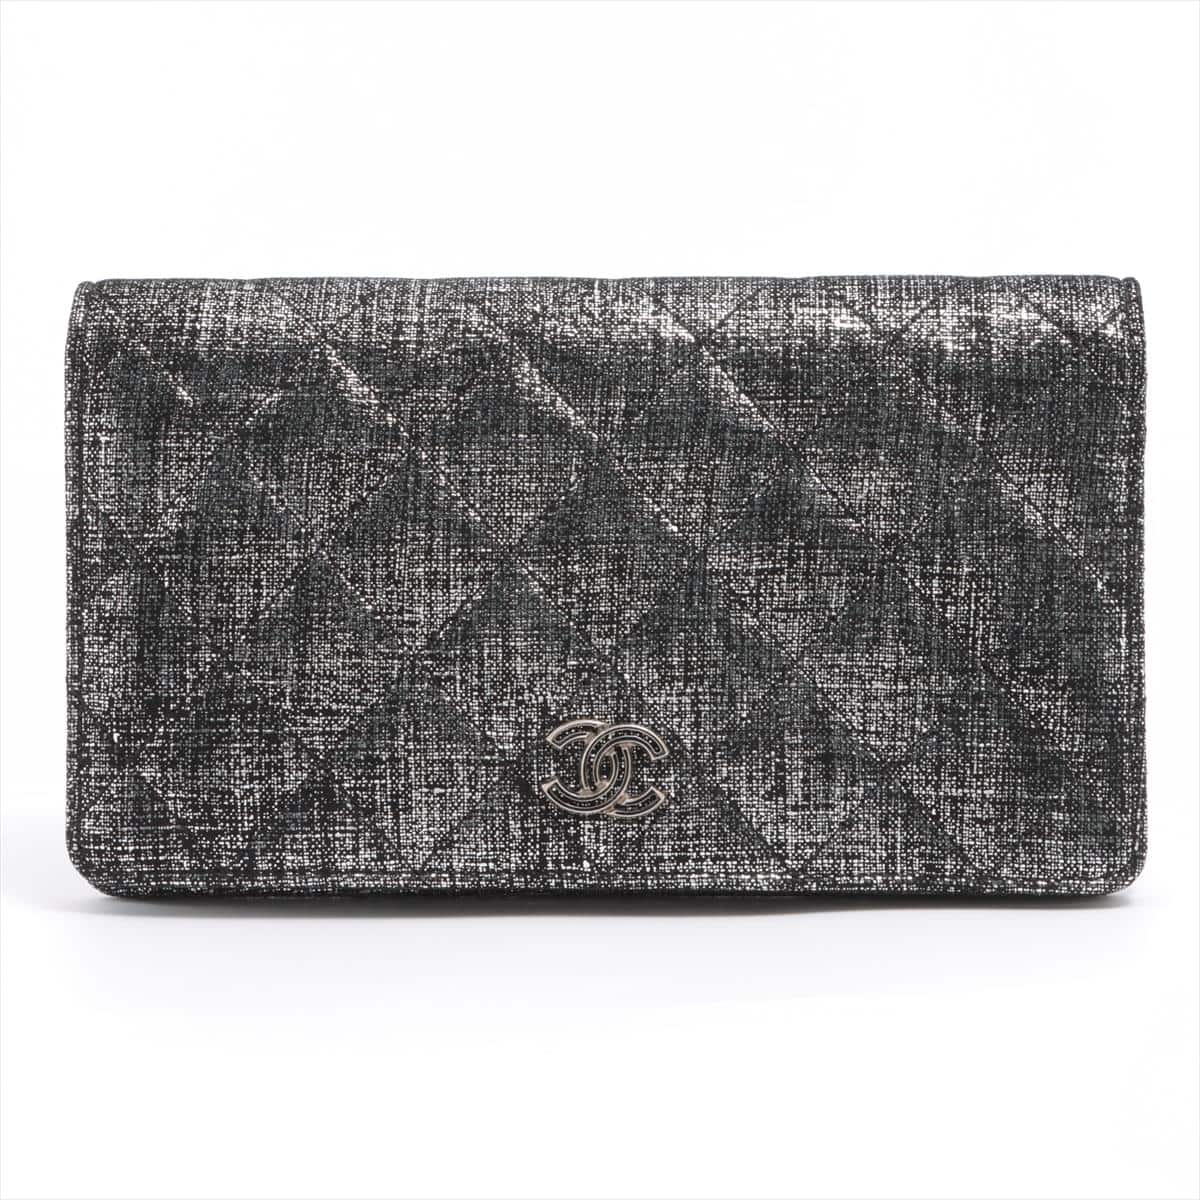 Chanel Matelasse canvas Wallet Silver Silver Metal fittings 18XXXXXX